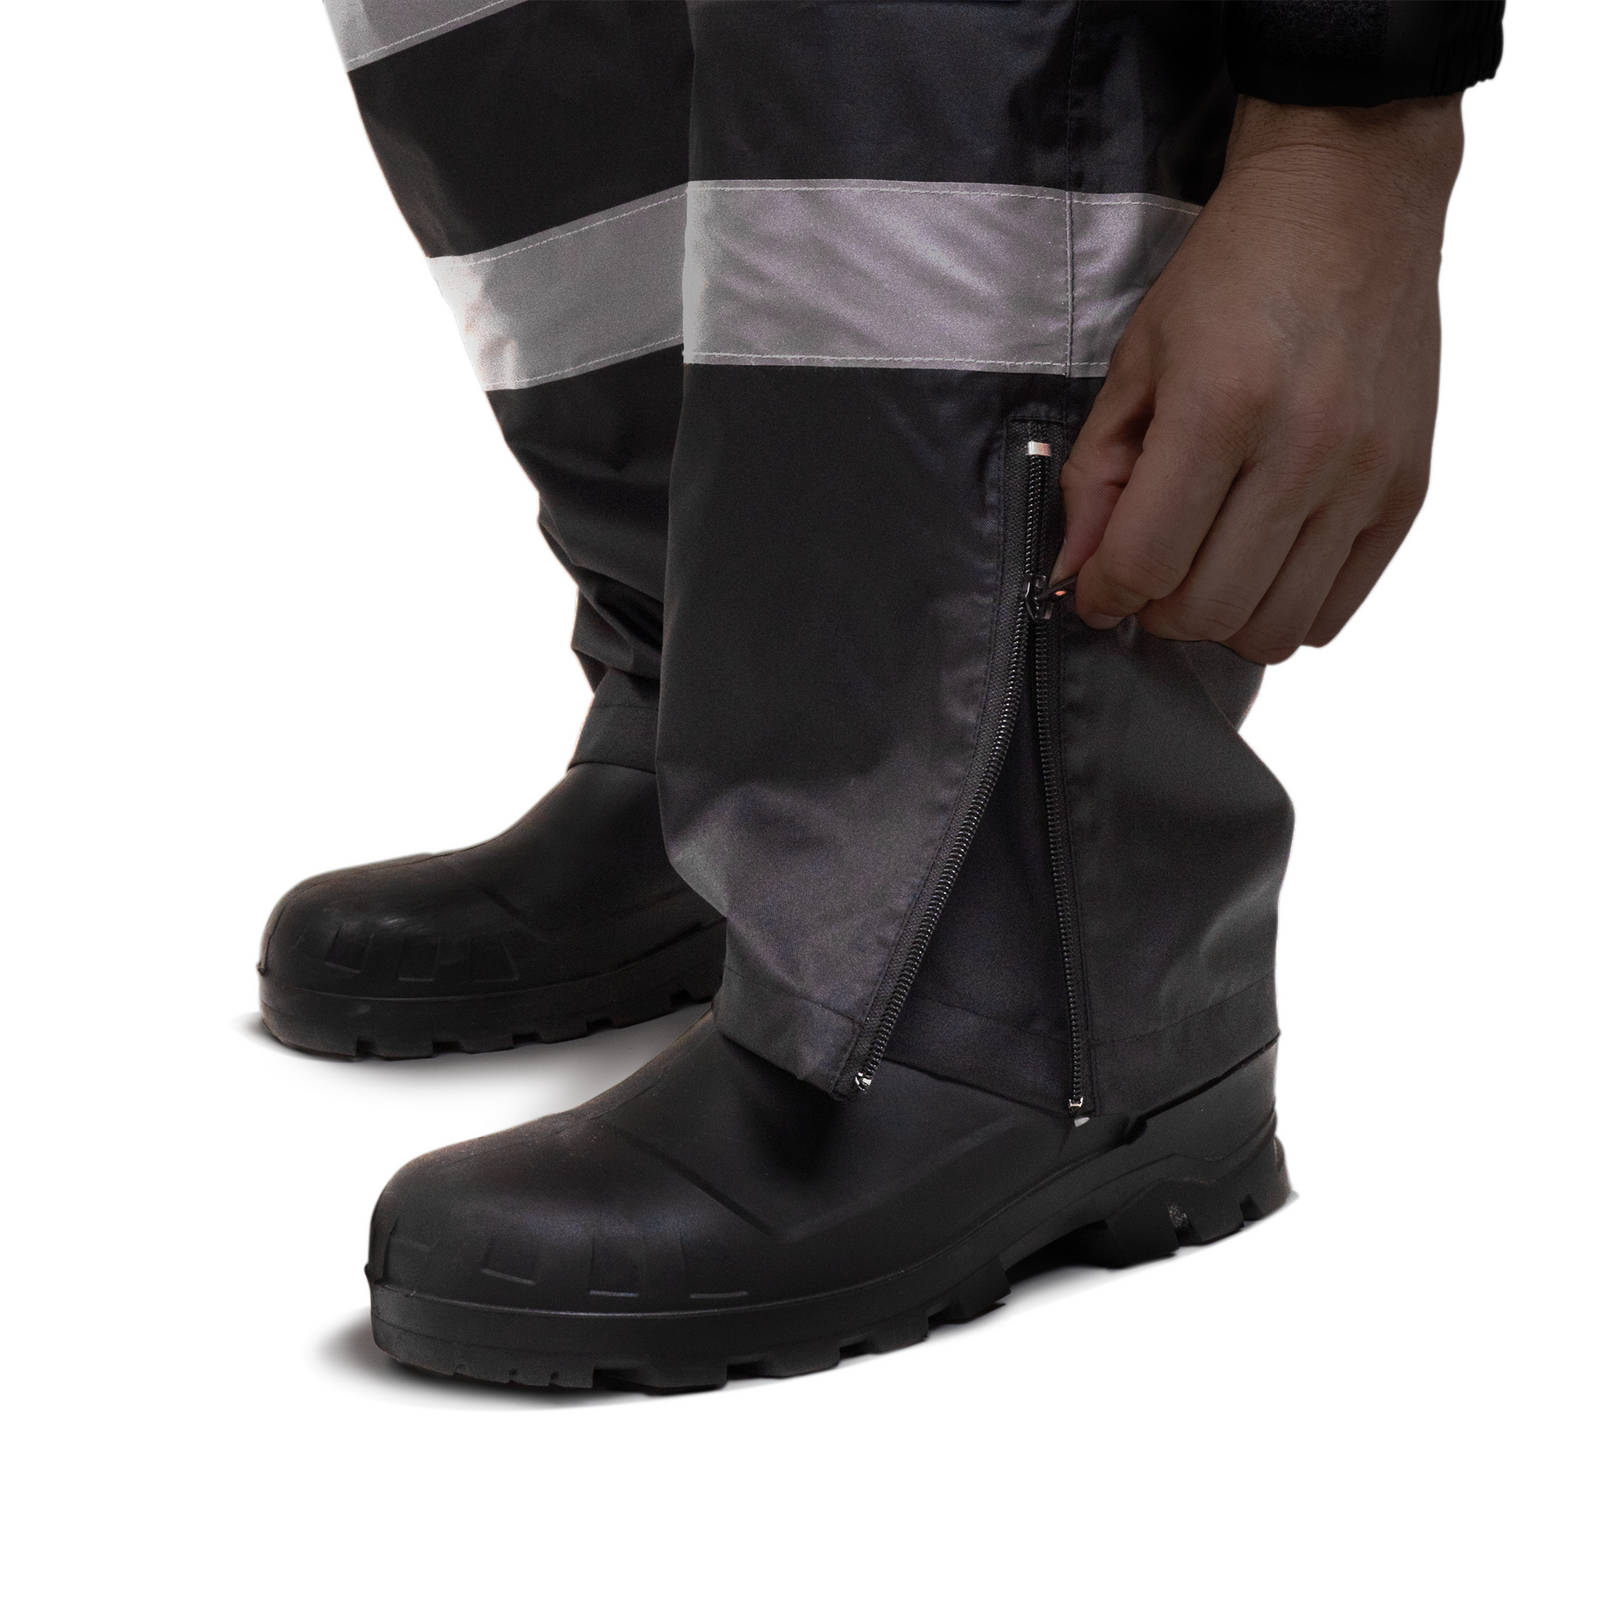 Close up detail to show the zipper at boot level of the rain pants to expand the boot section